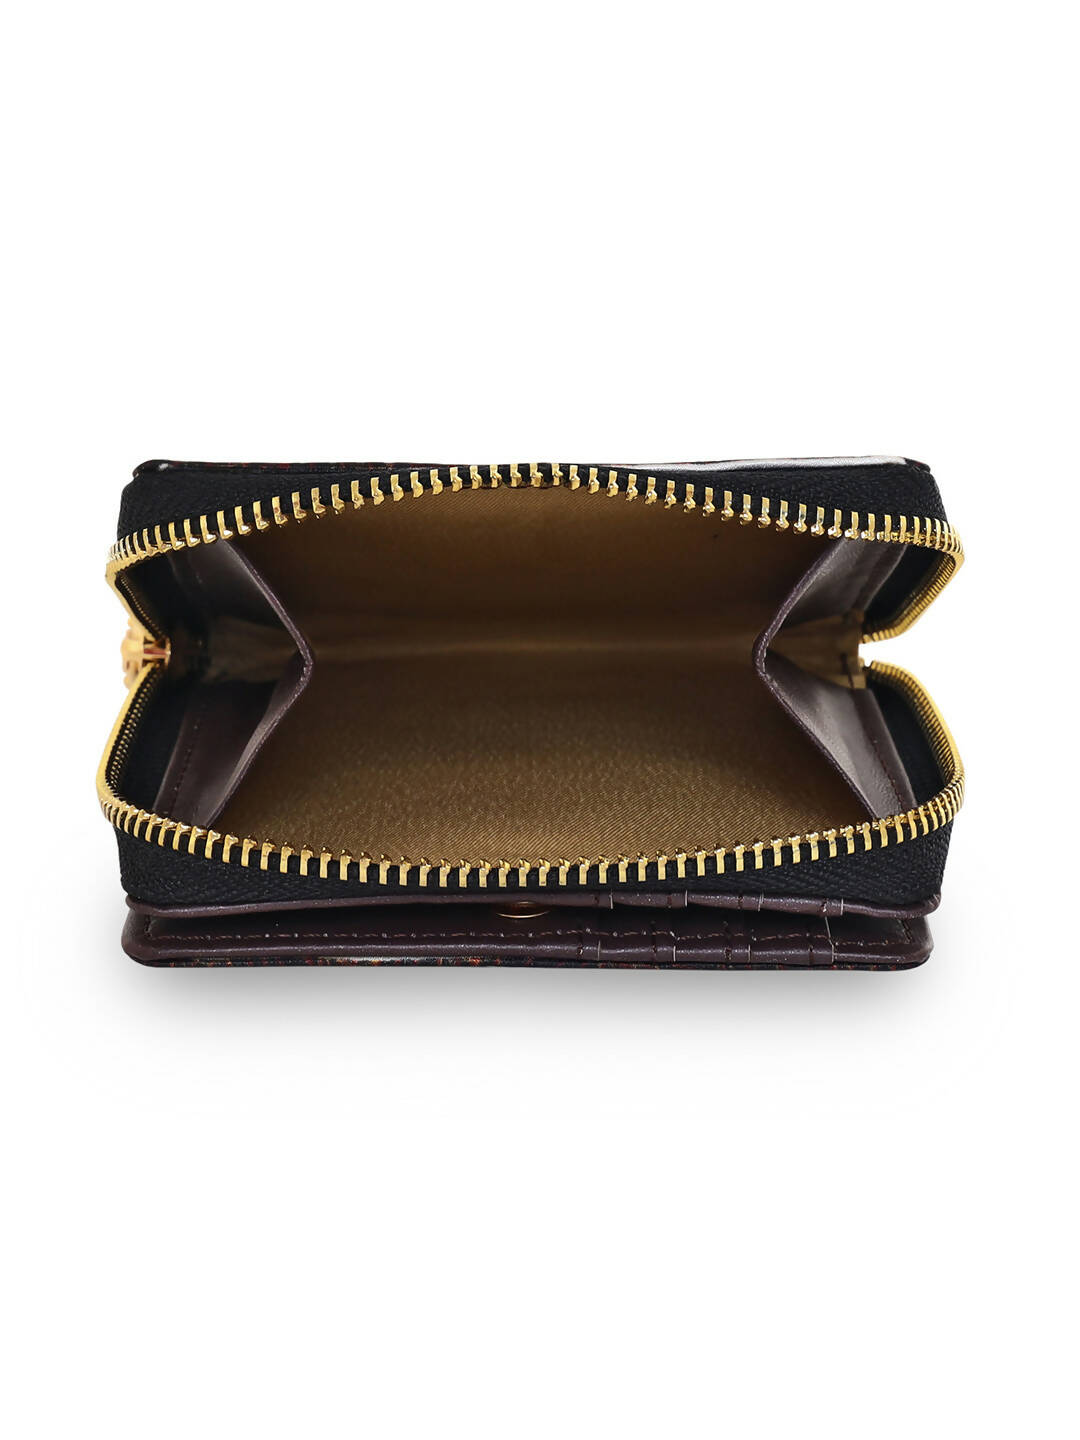 Hermes Citizen Twill Long Wallet Black Epsom Leather | Mightychic